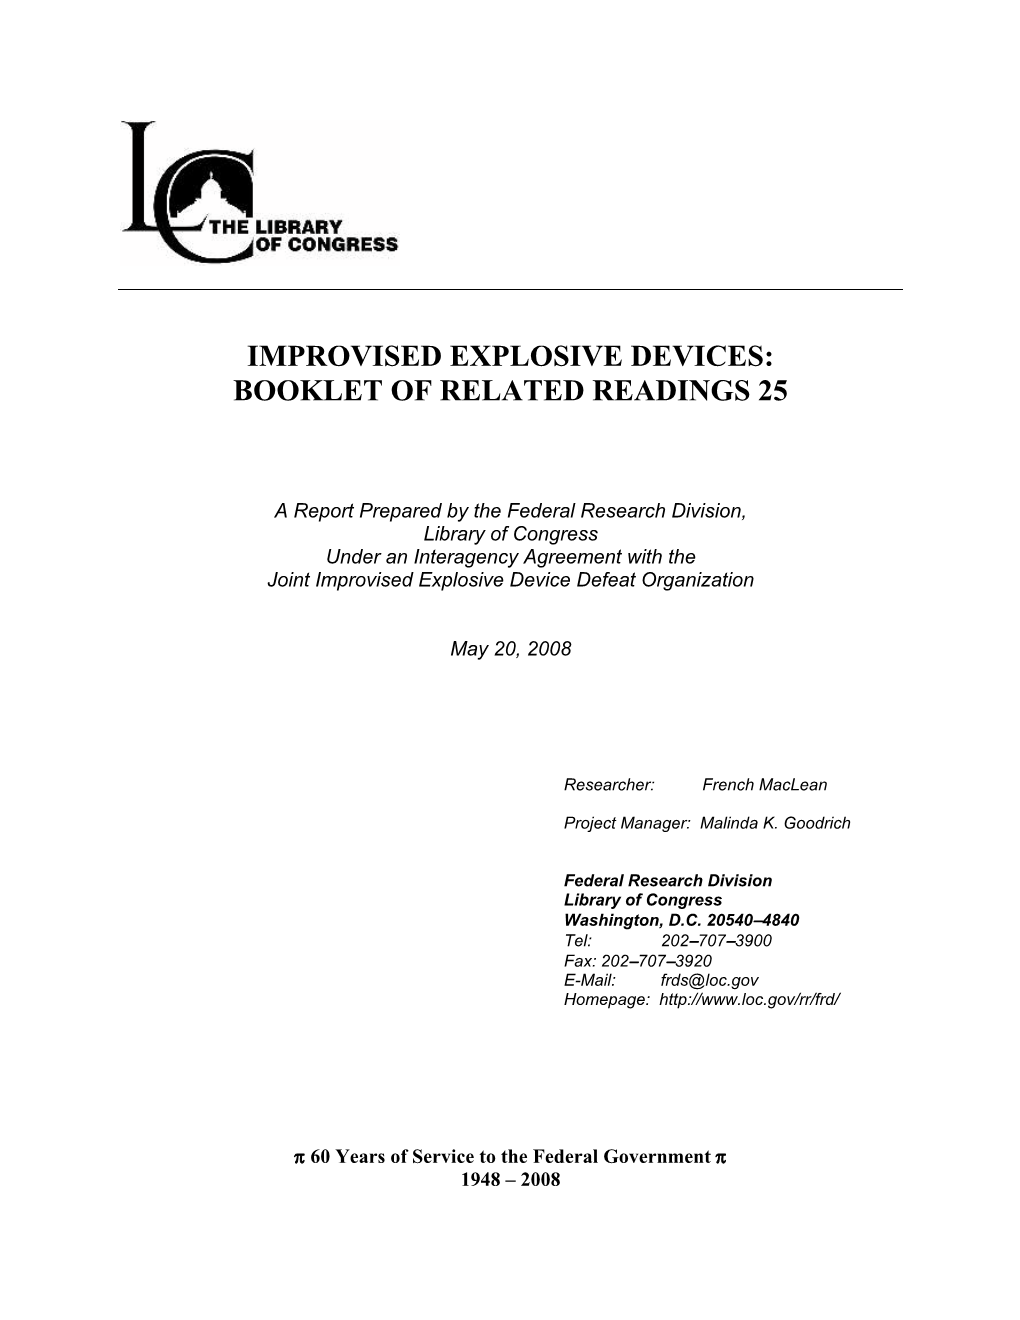 Improvised Explosive Devices: Booklet of Related Readings 25